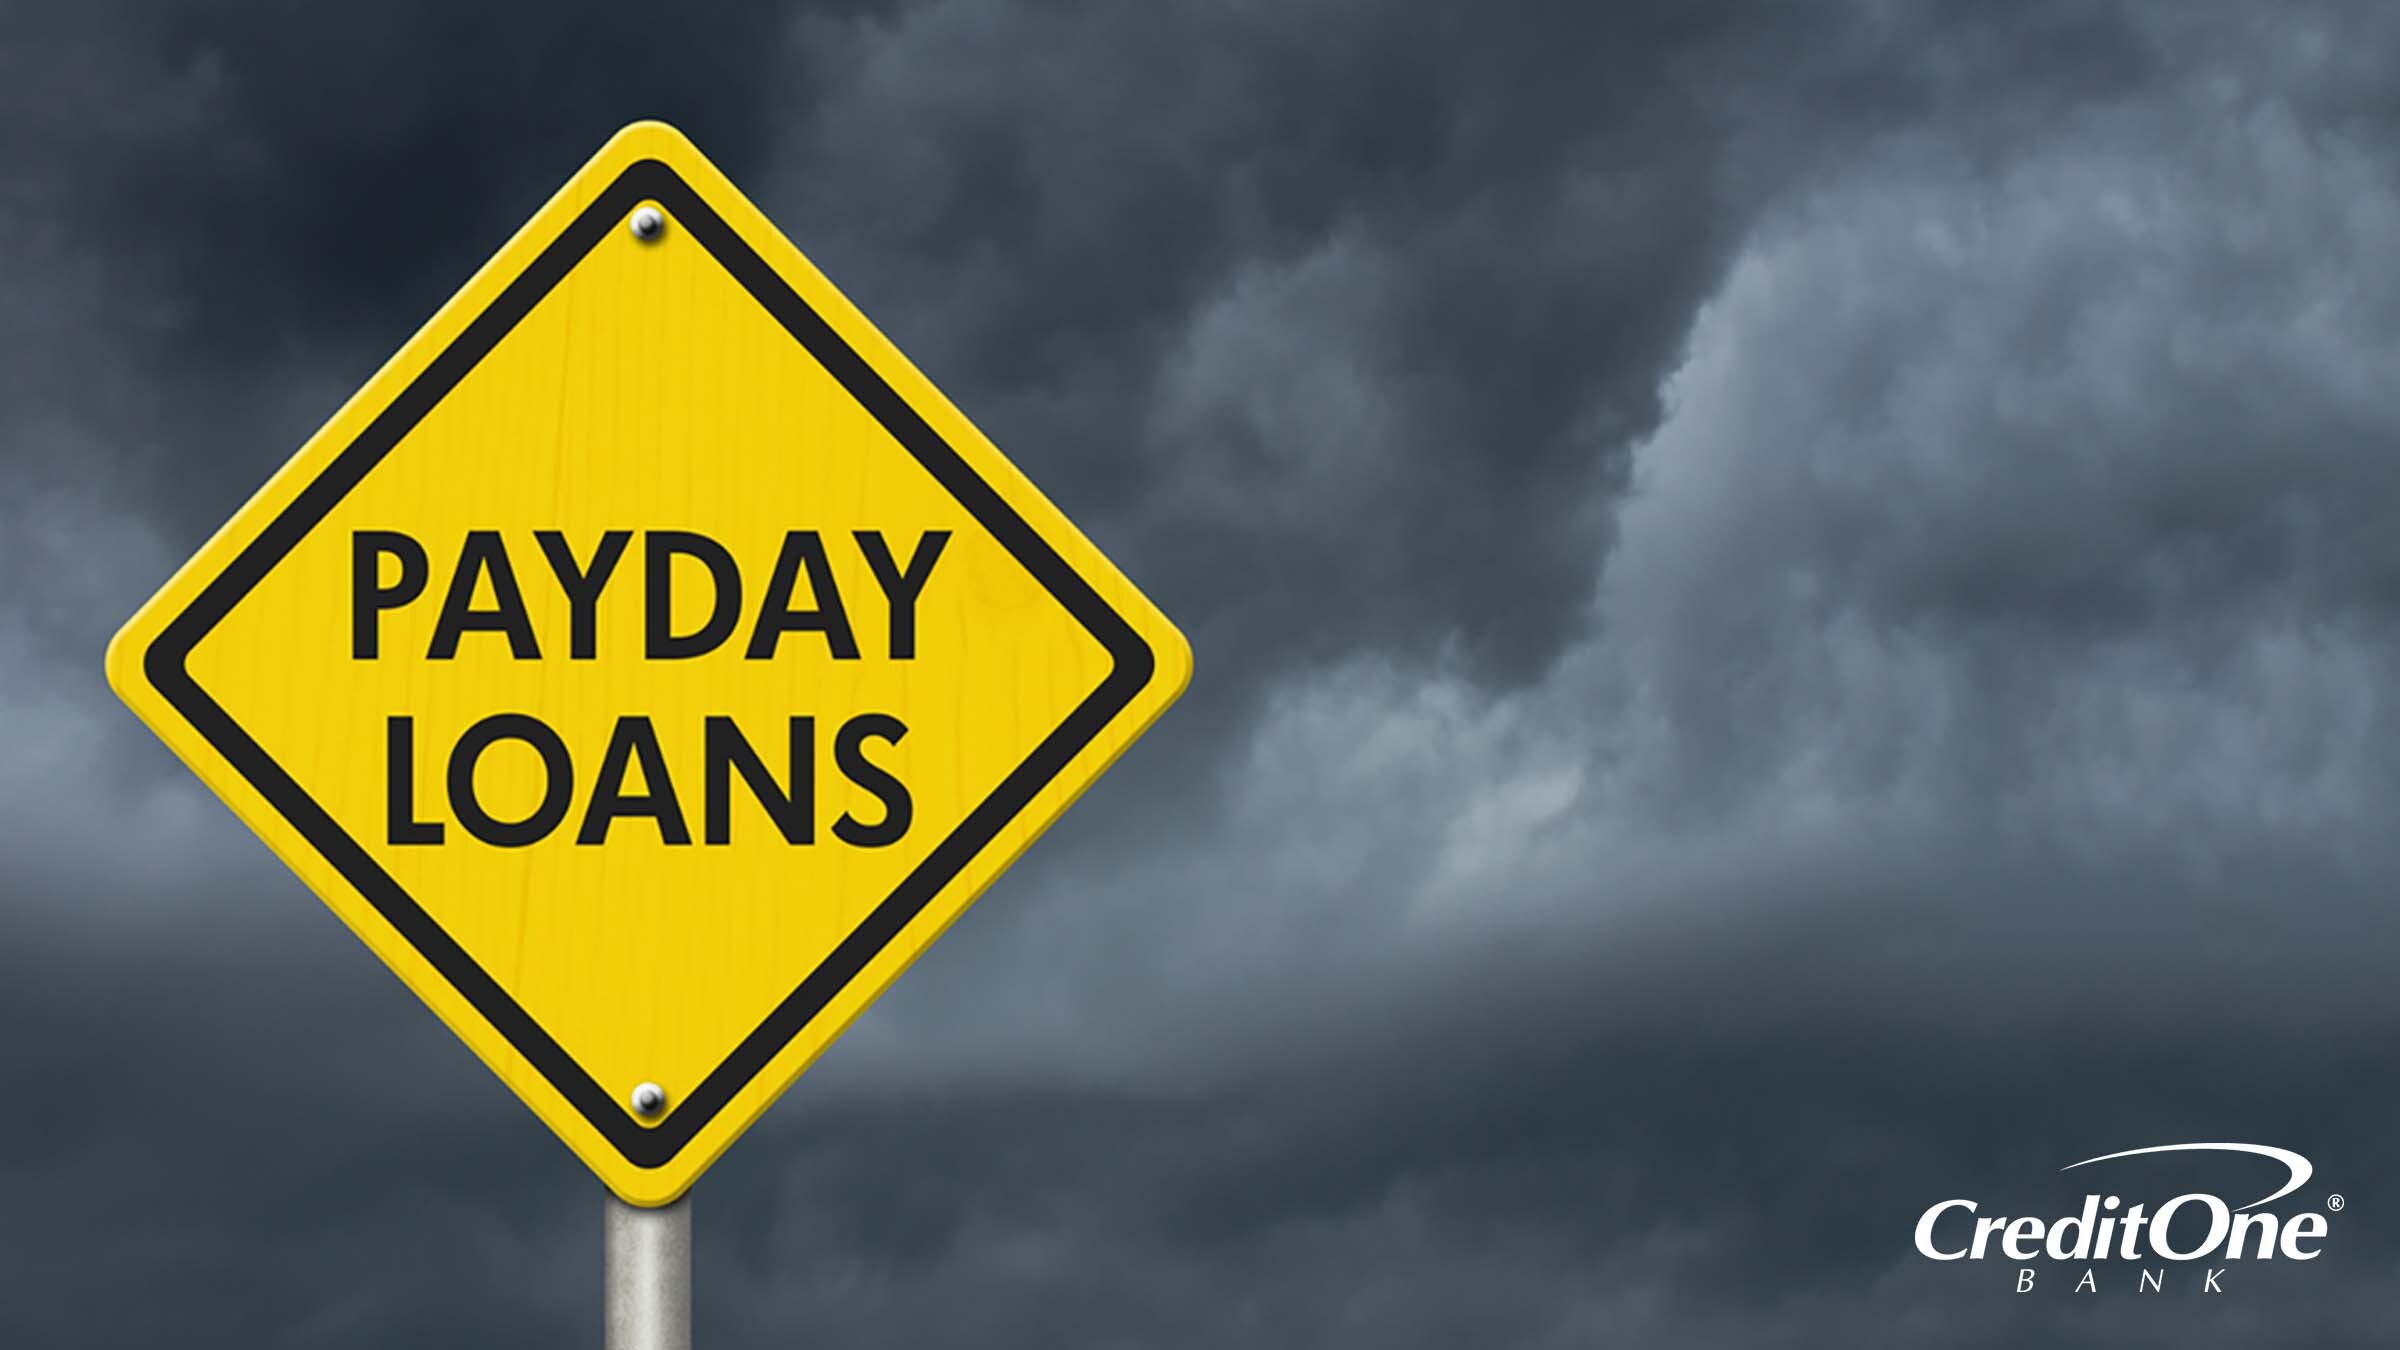 Warning sign: What you should know about Payday loans